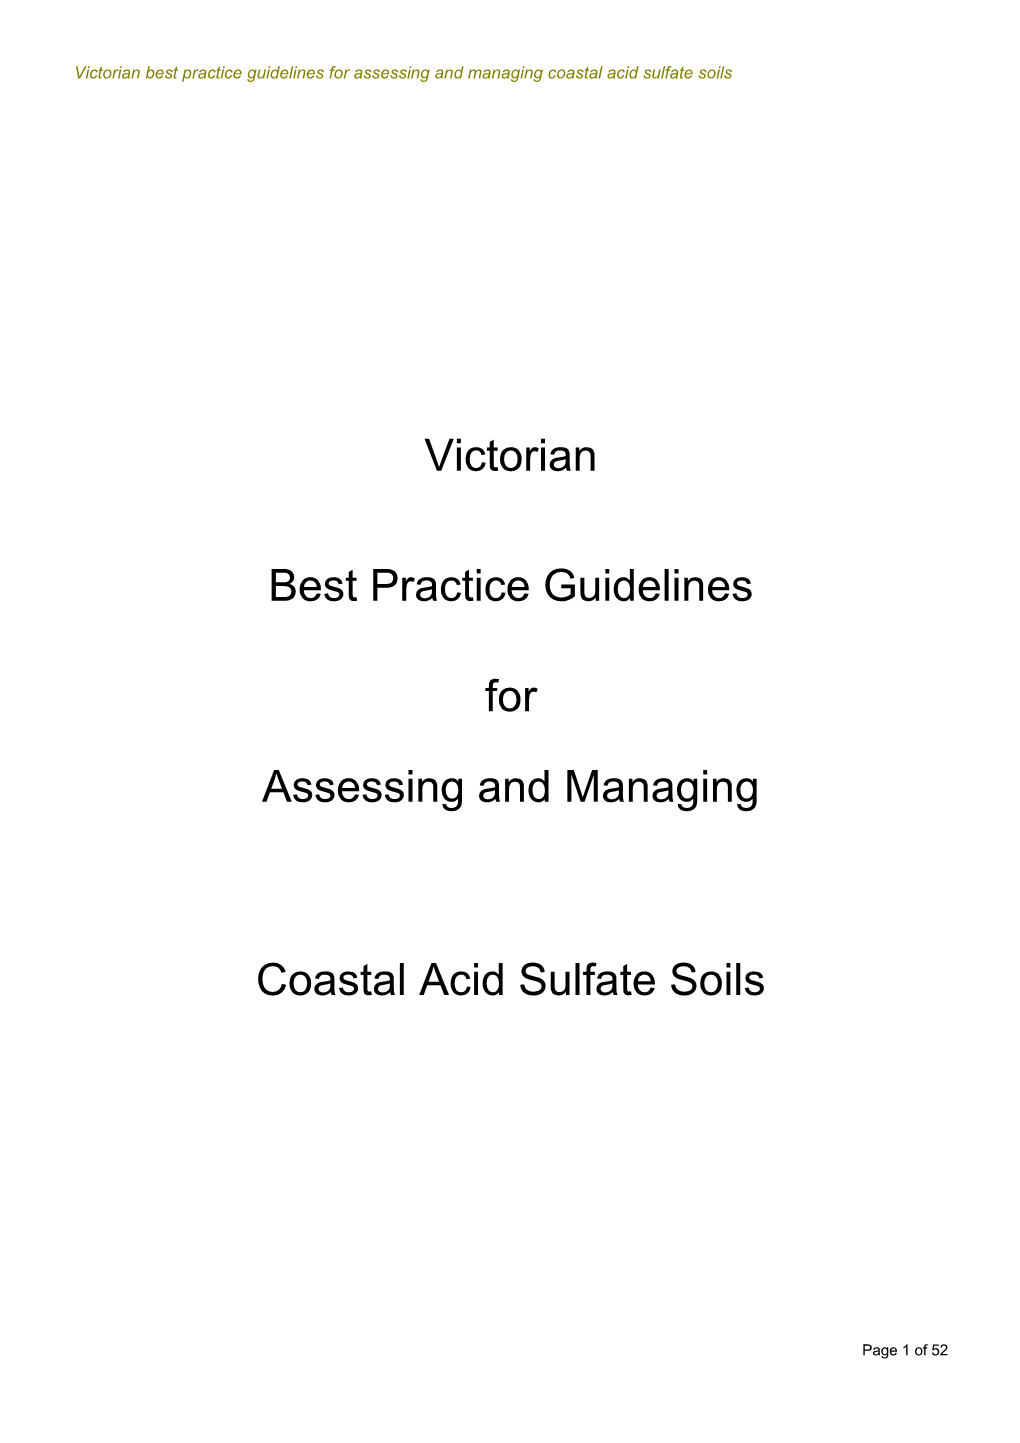 Victorian Best Practice Guidelines for Assessing and Managing Coastal Acid Sulfate Soils